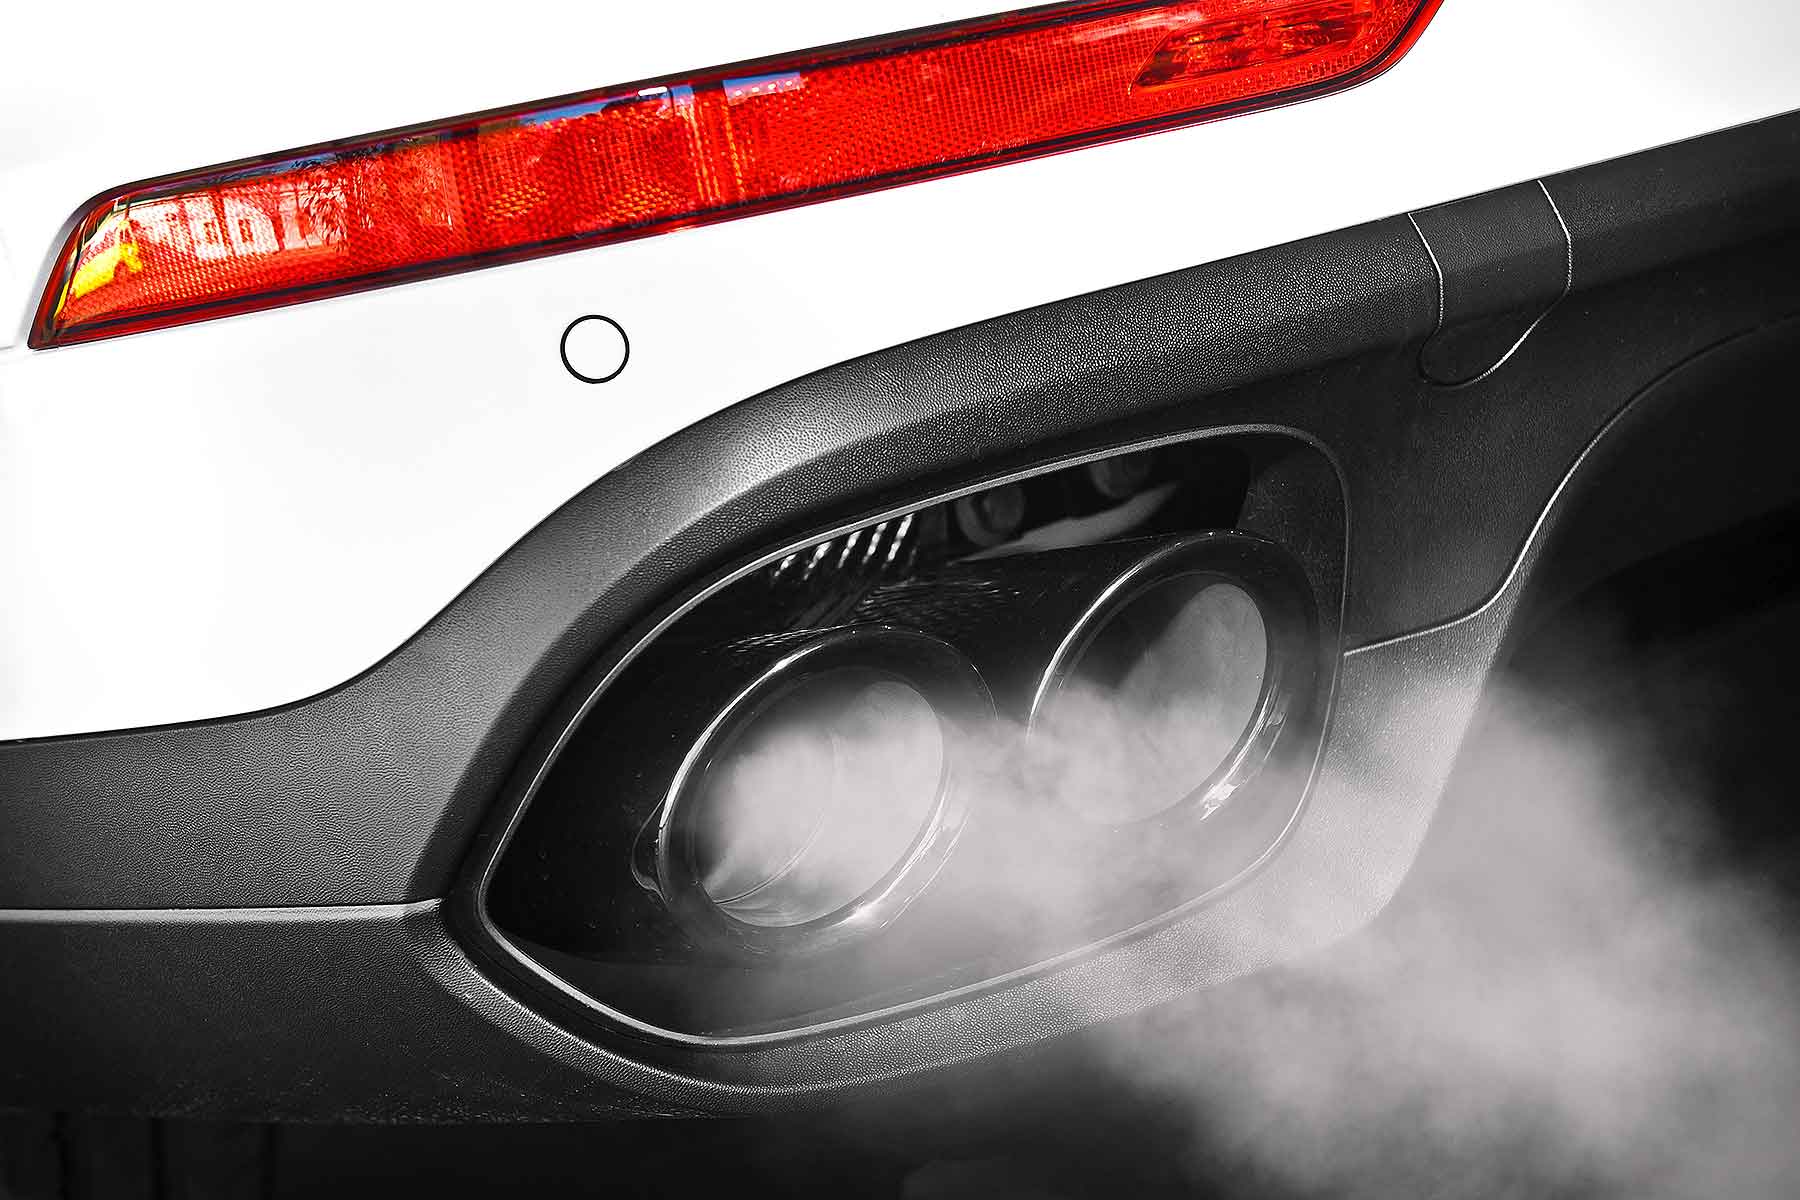 Tailpipe emissions